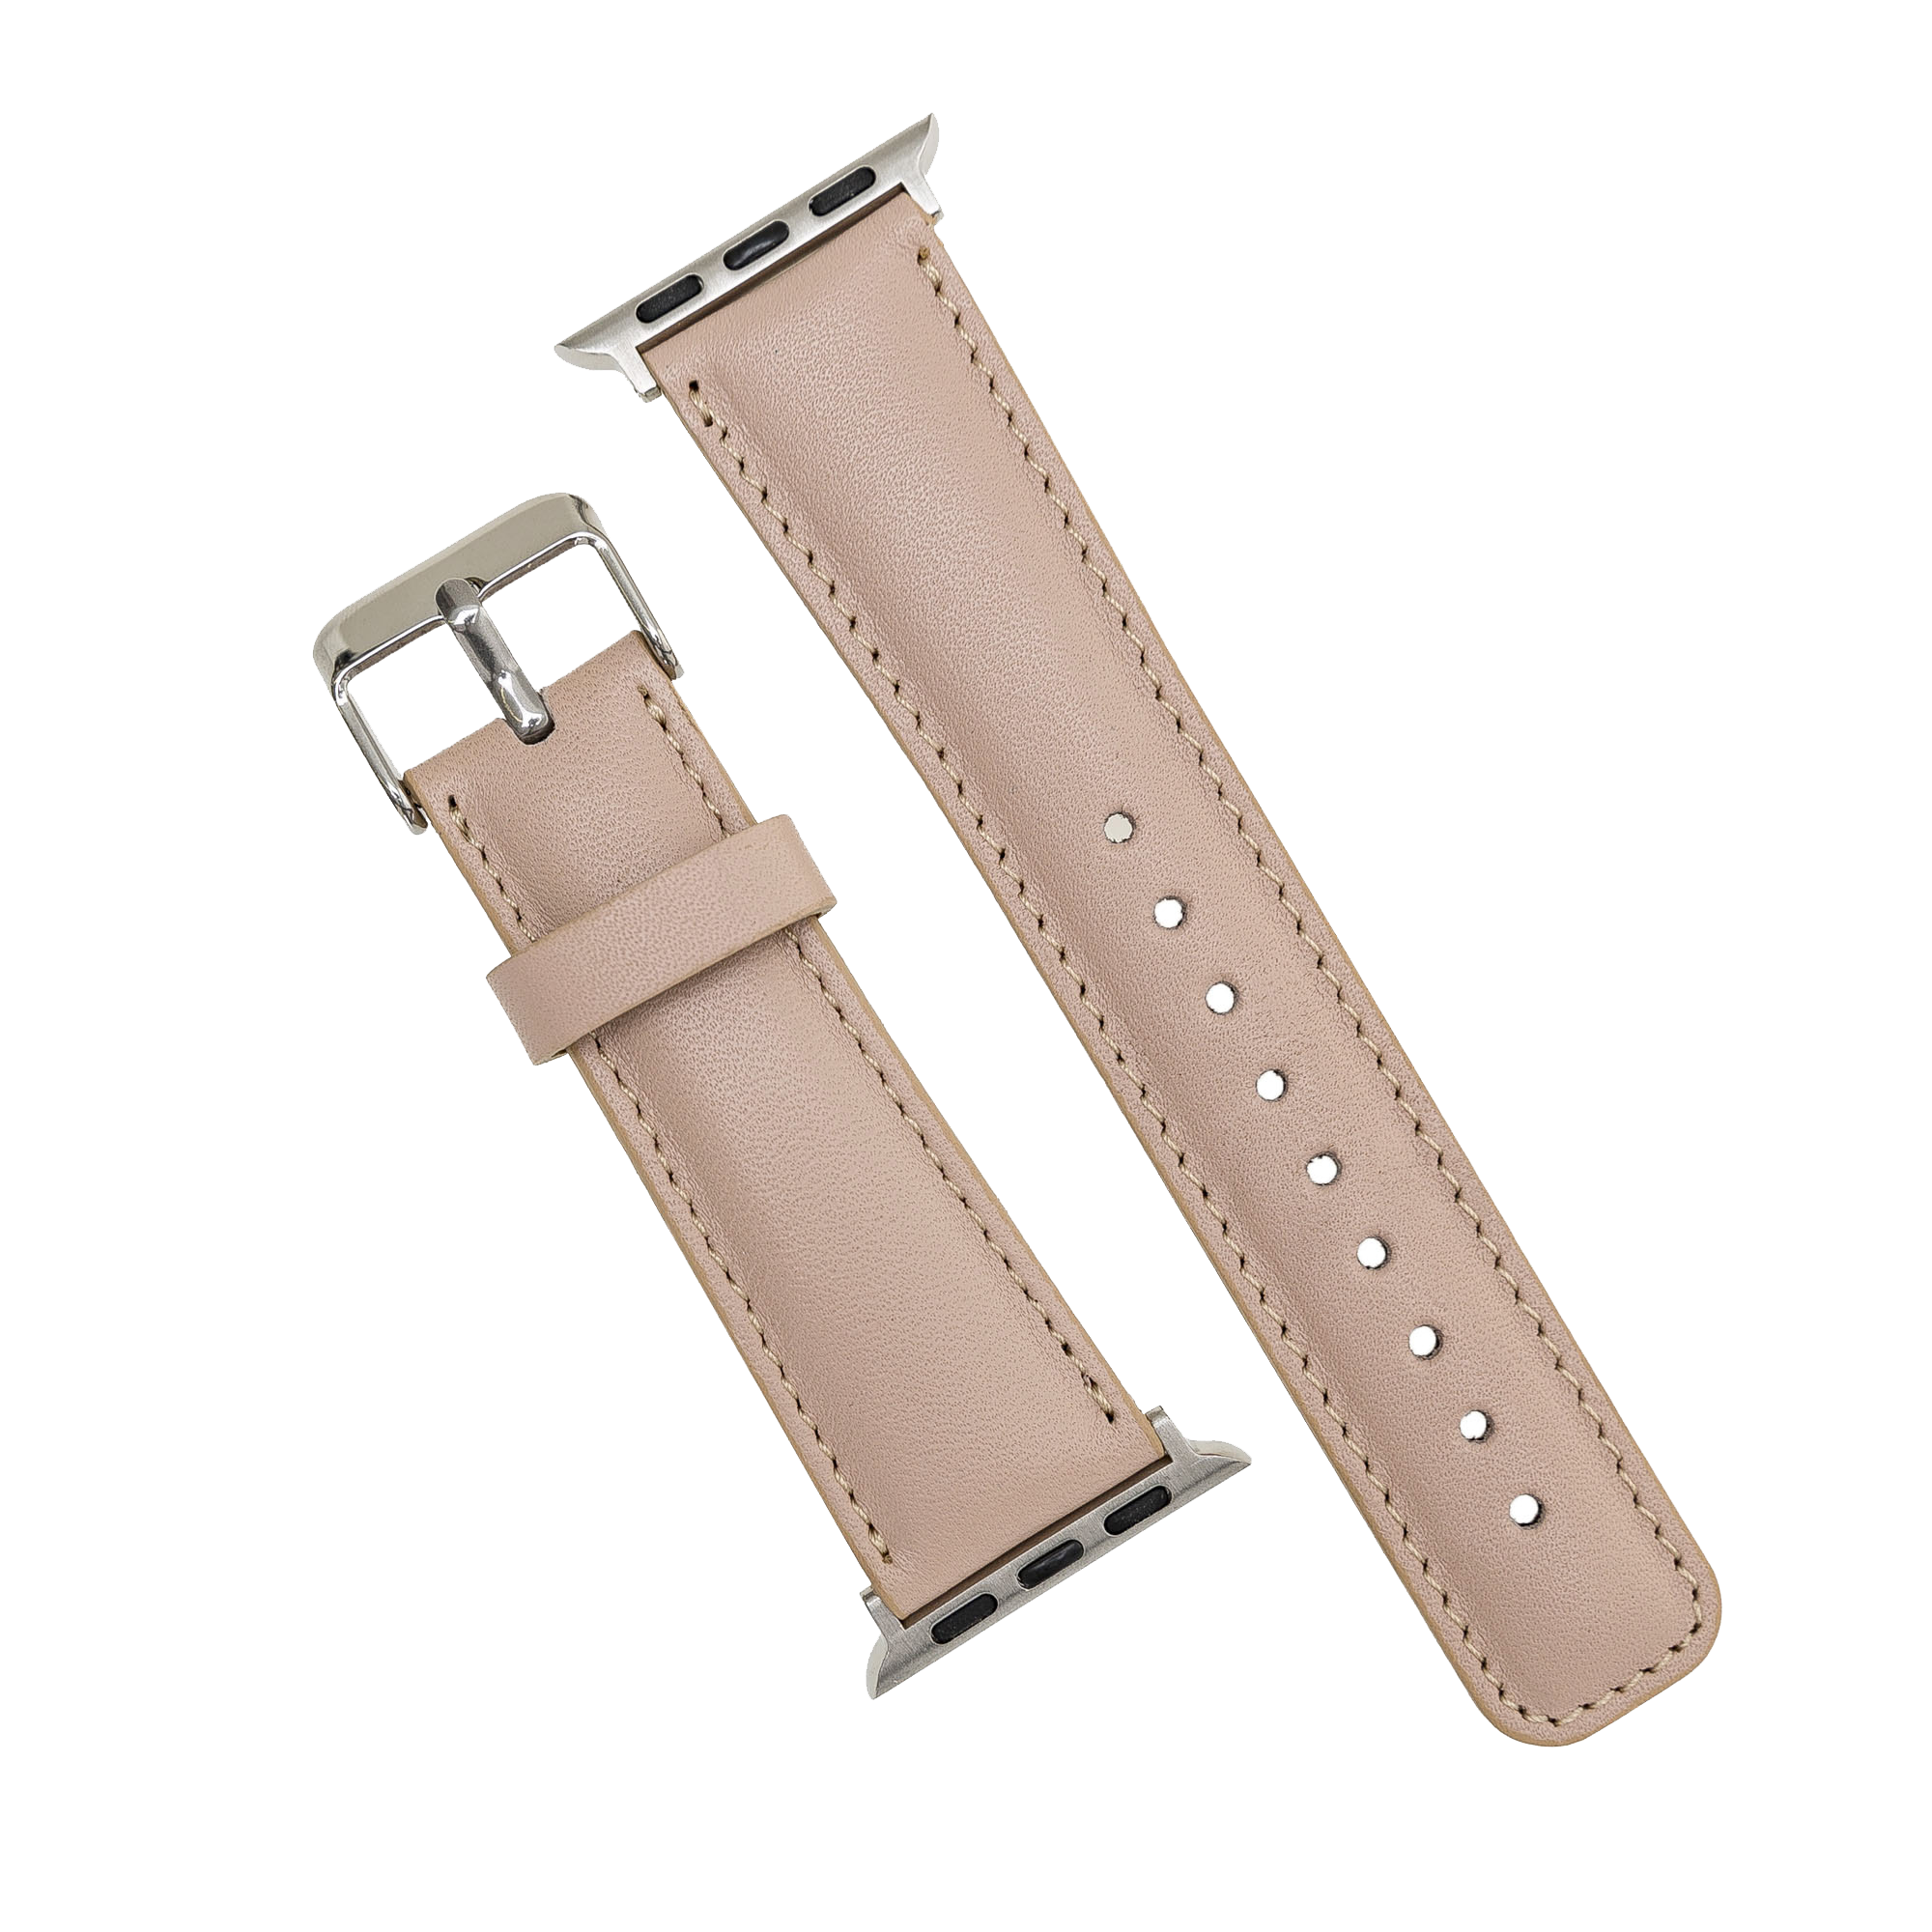 DelfiCase Liverpool Collection Leather Watch Band for Apple & Fitbit Versa Watch Band 4